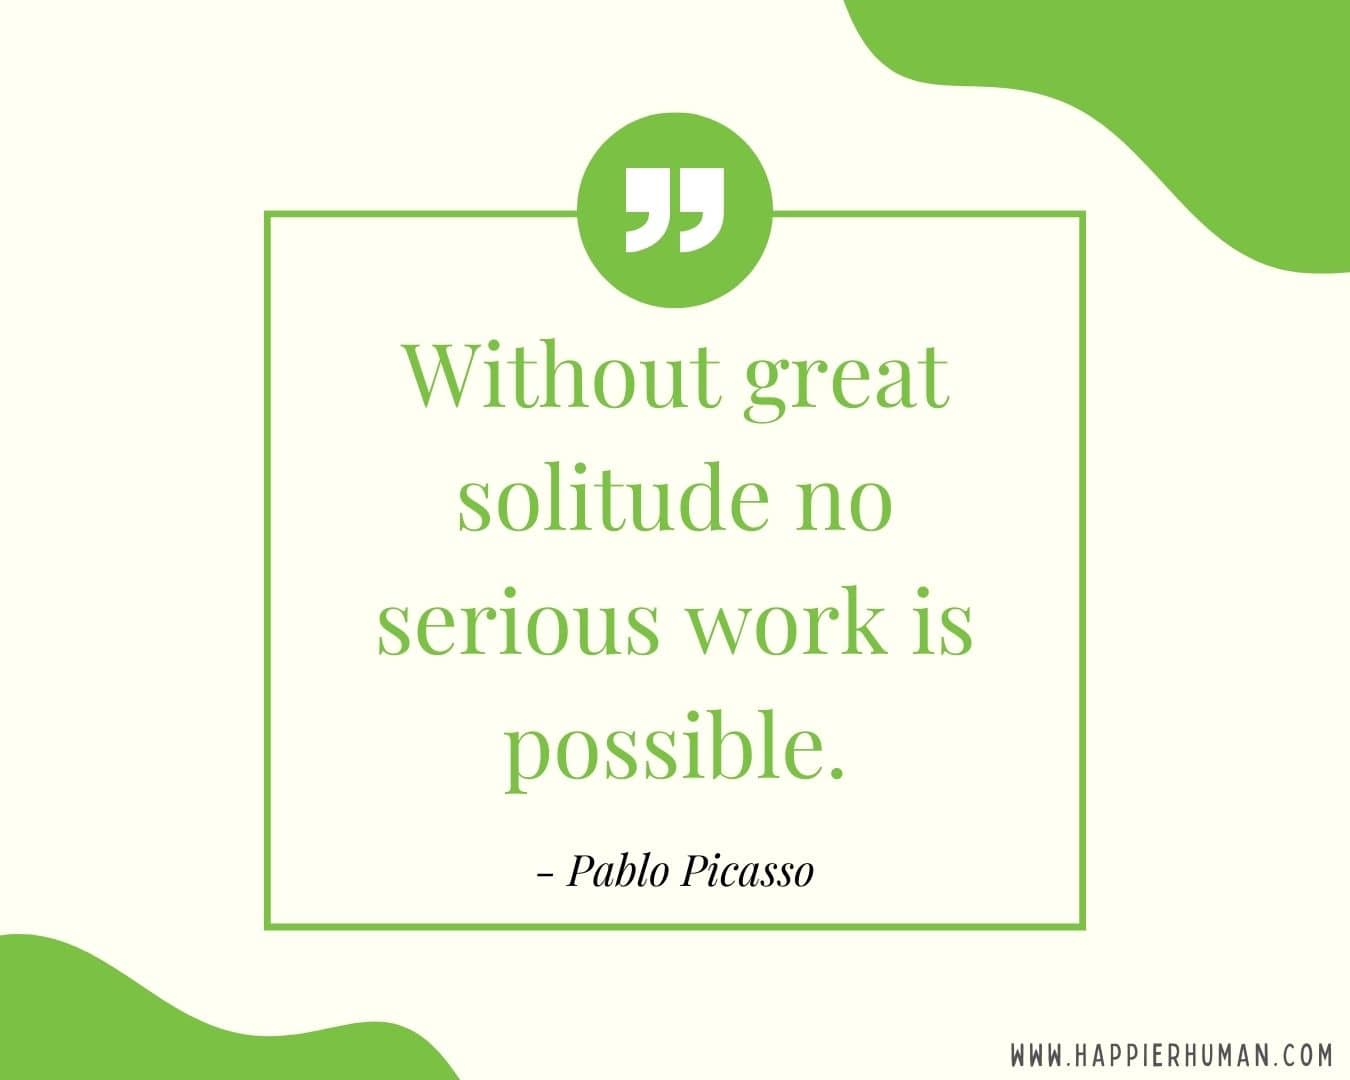 Introvert Quotes - “Without great solitude no serious work is possible.” – Pablo Picasso